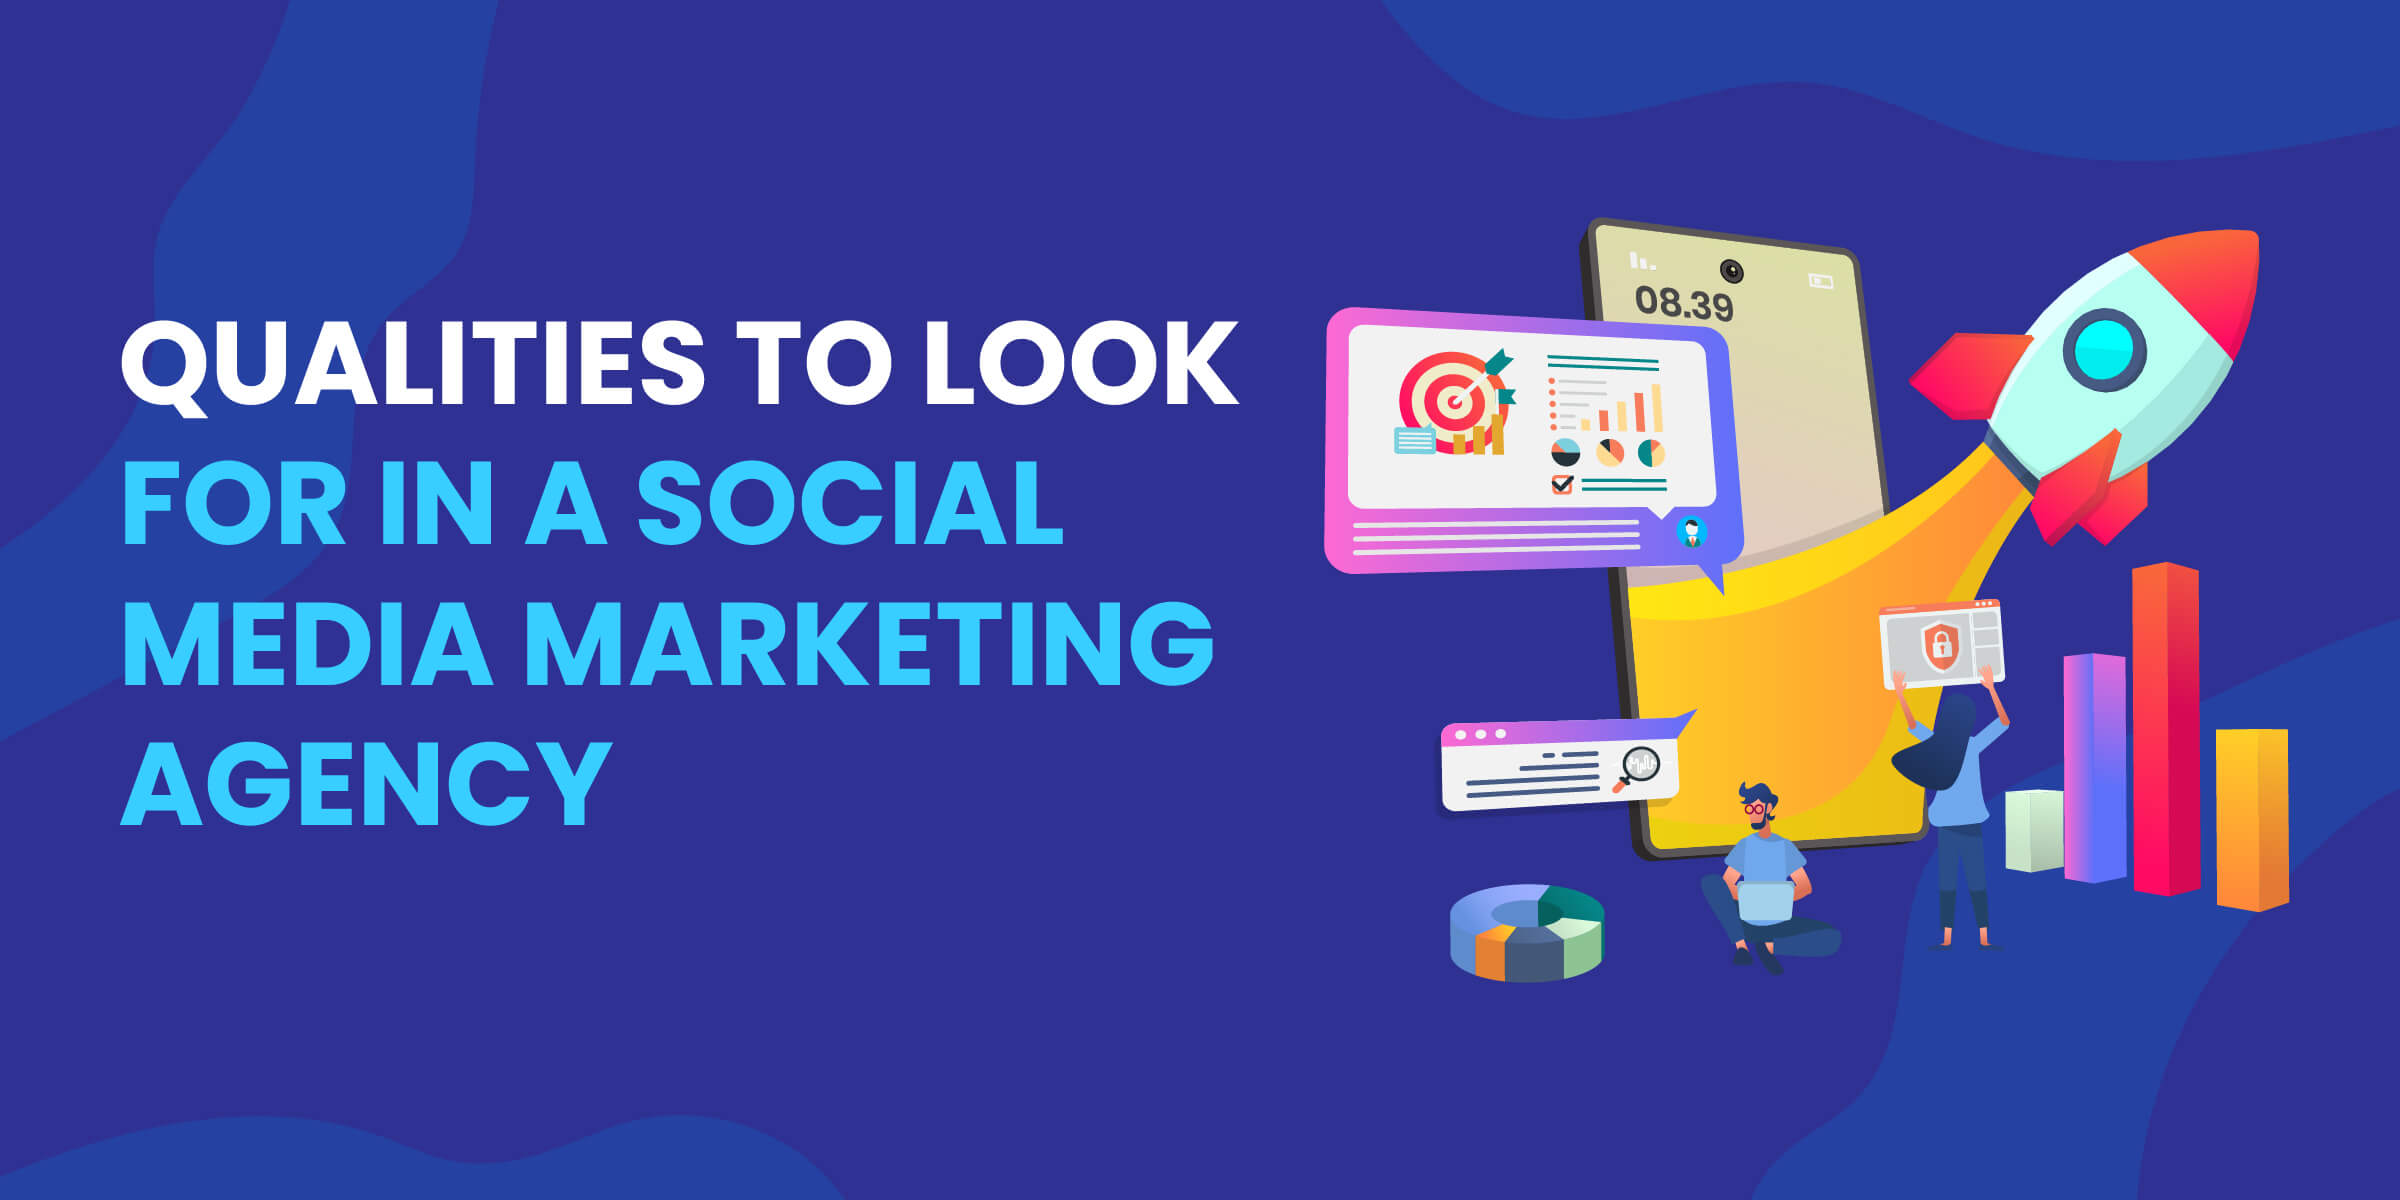 Qualities to Look for in Social Media Marketing Agency